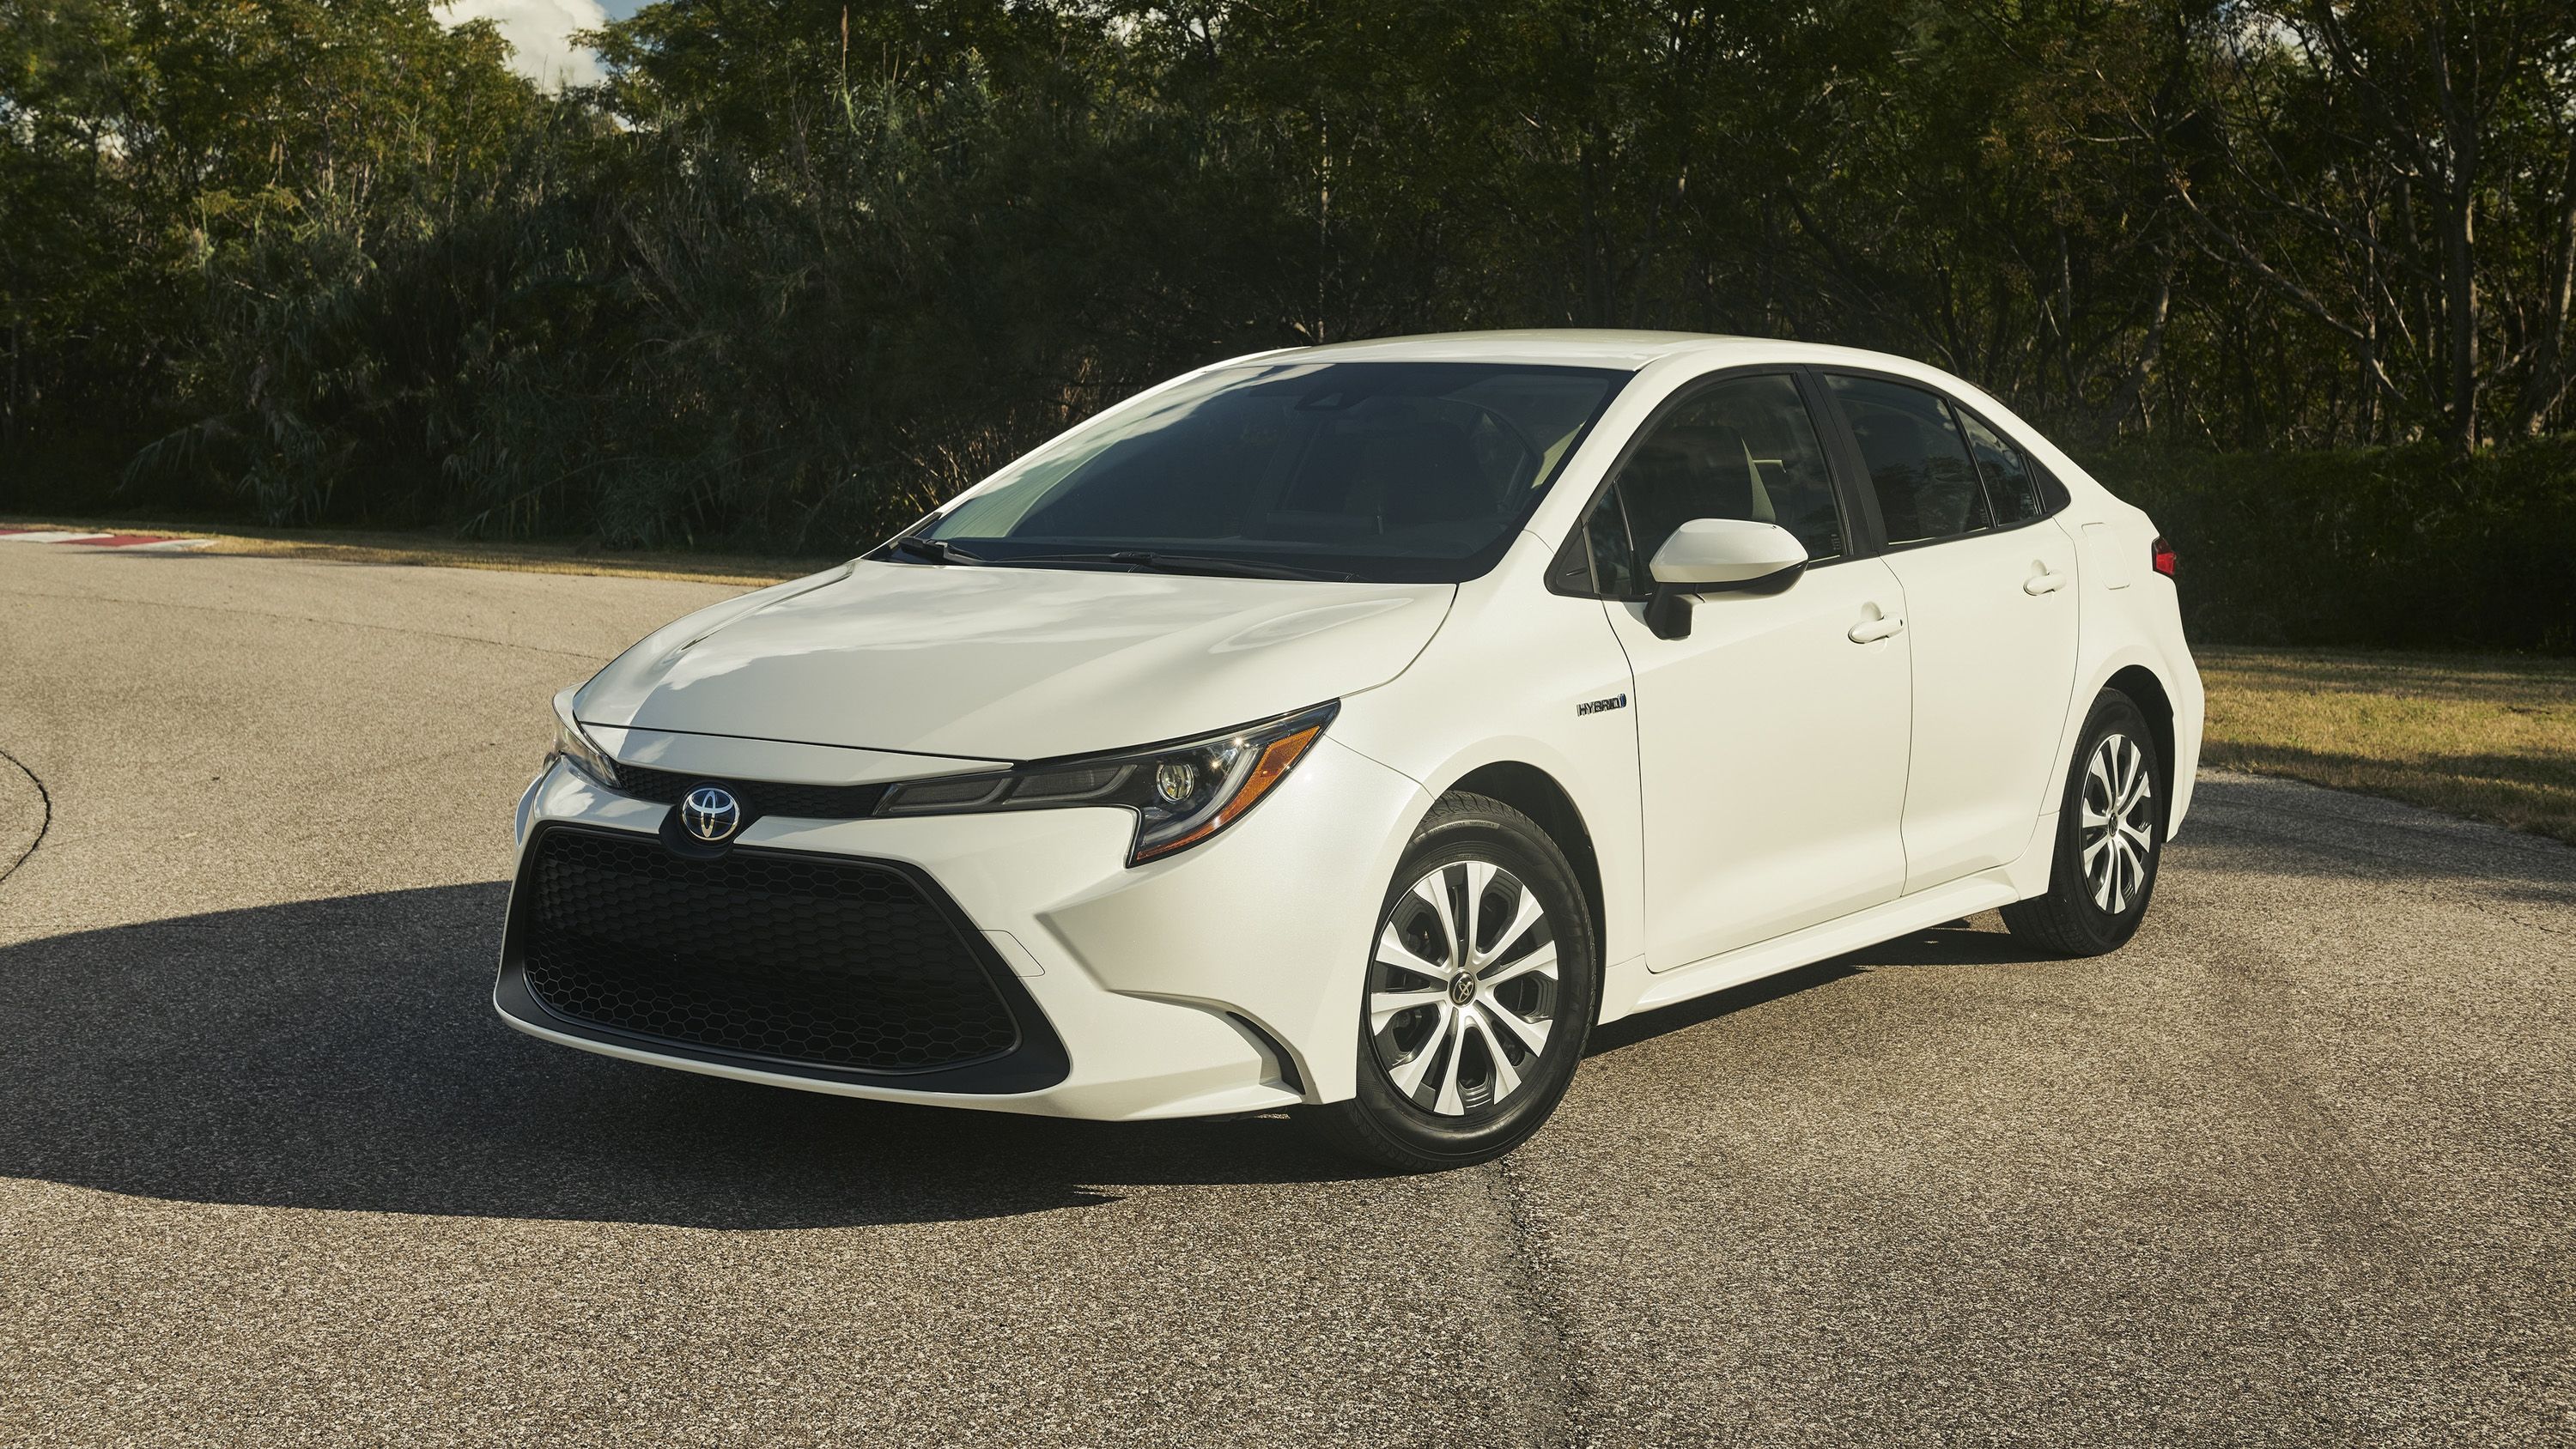 The Toyota Corolla Hybrid Looks Sporty and Delivers 50 MPG